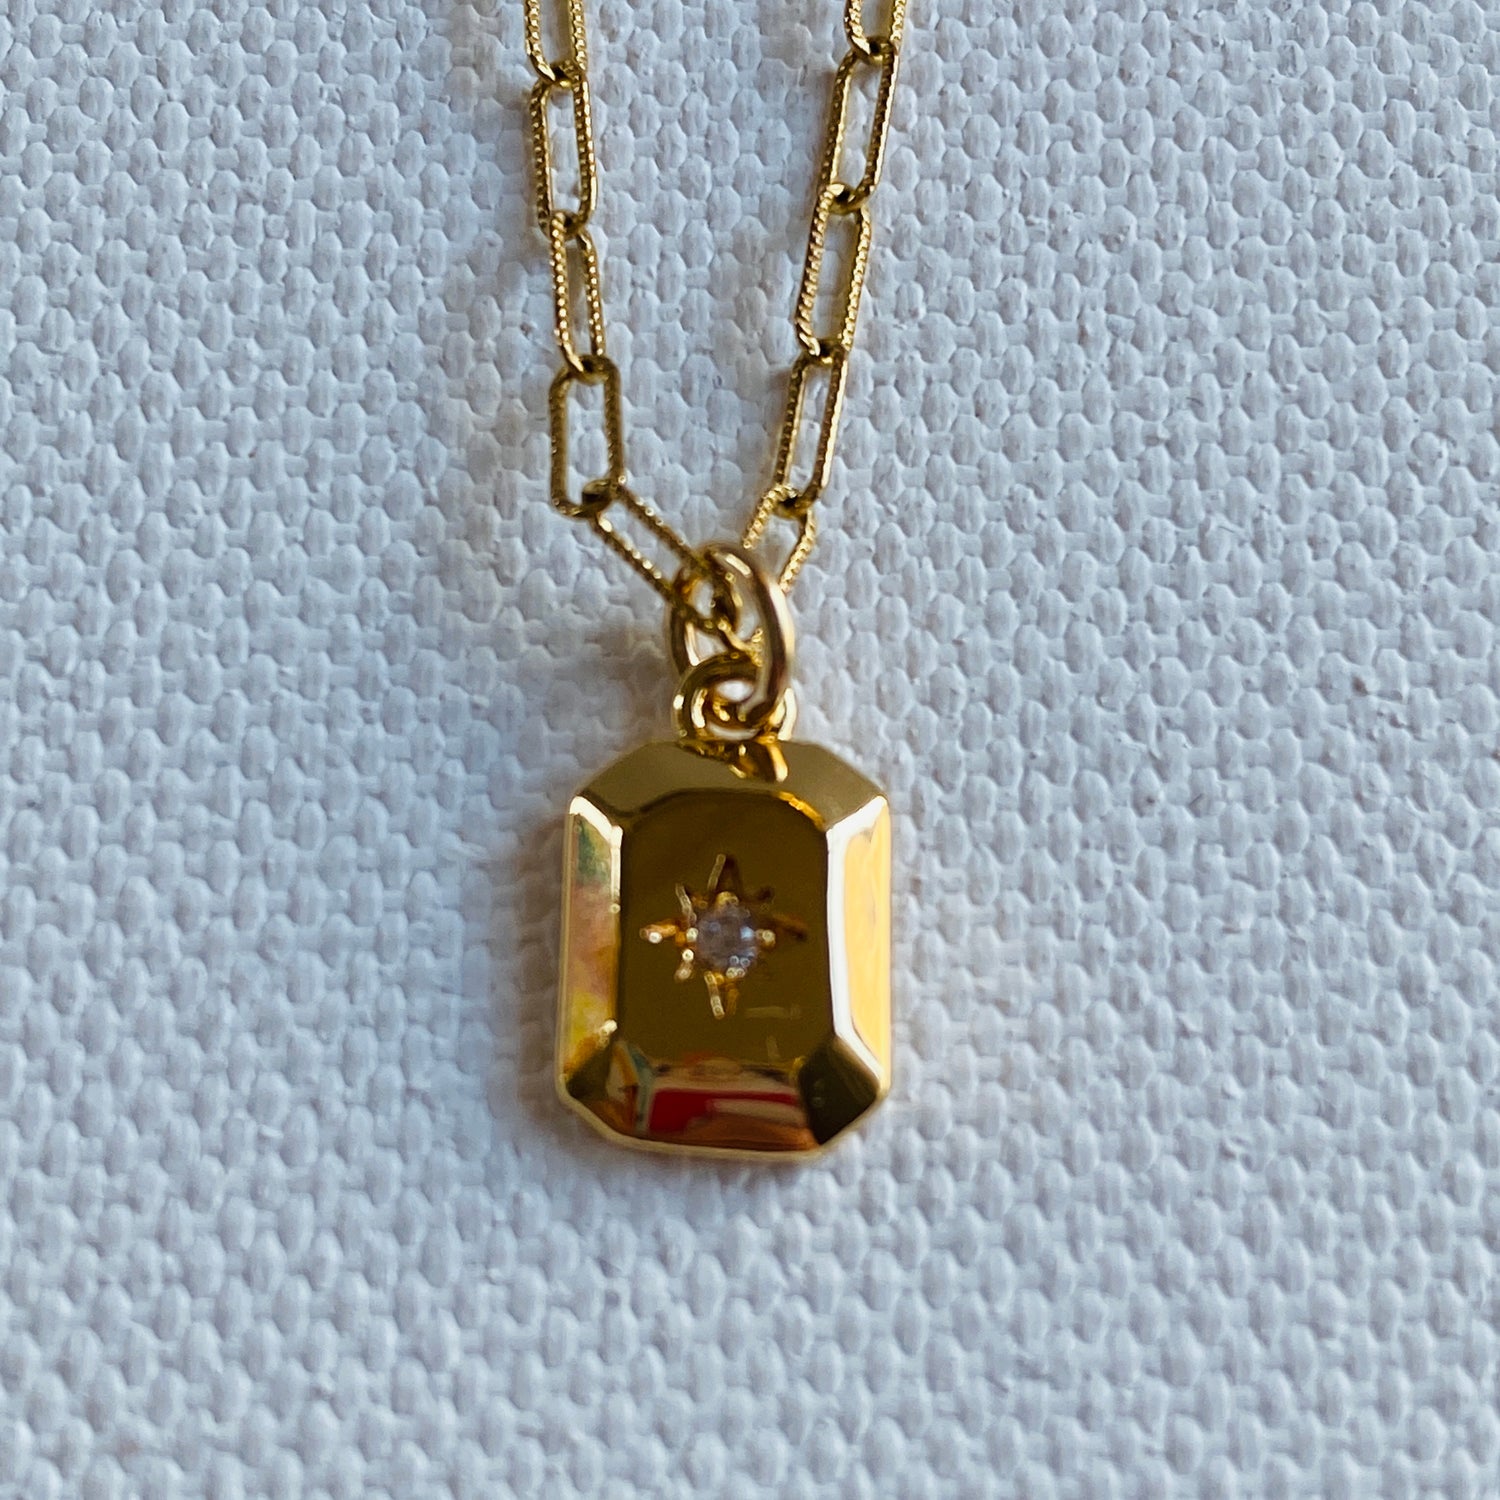 Gold, Delicate, Pendant, Charm, Star, Necklace